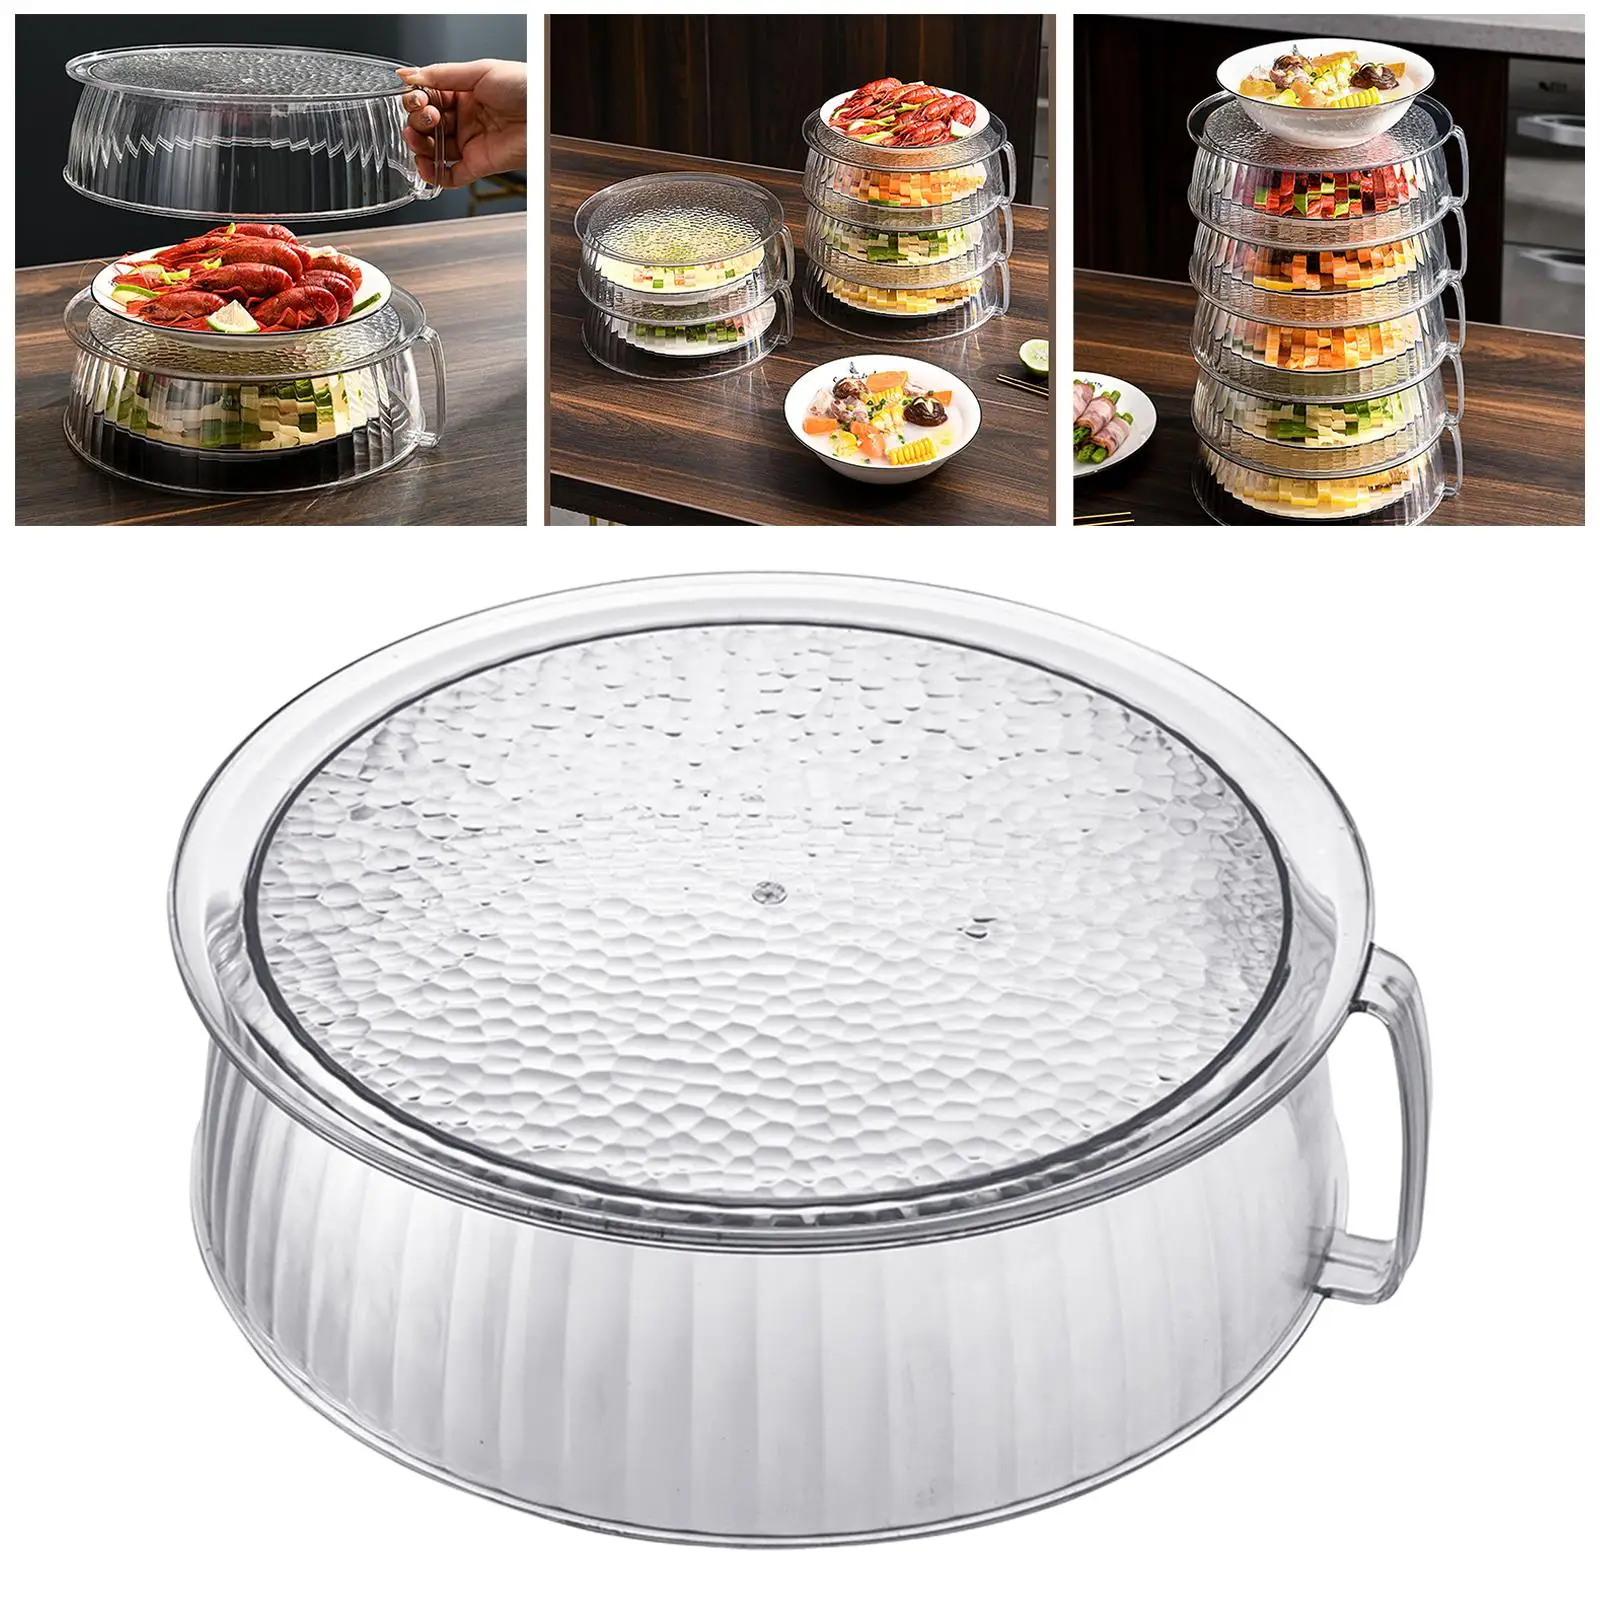 Multi Layer Dish Cover Multi Purpose High Capacity Transparent for Household